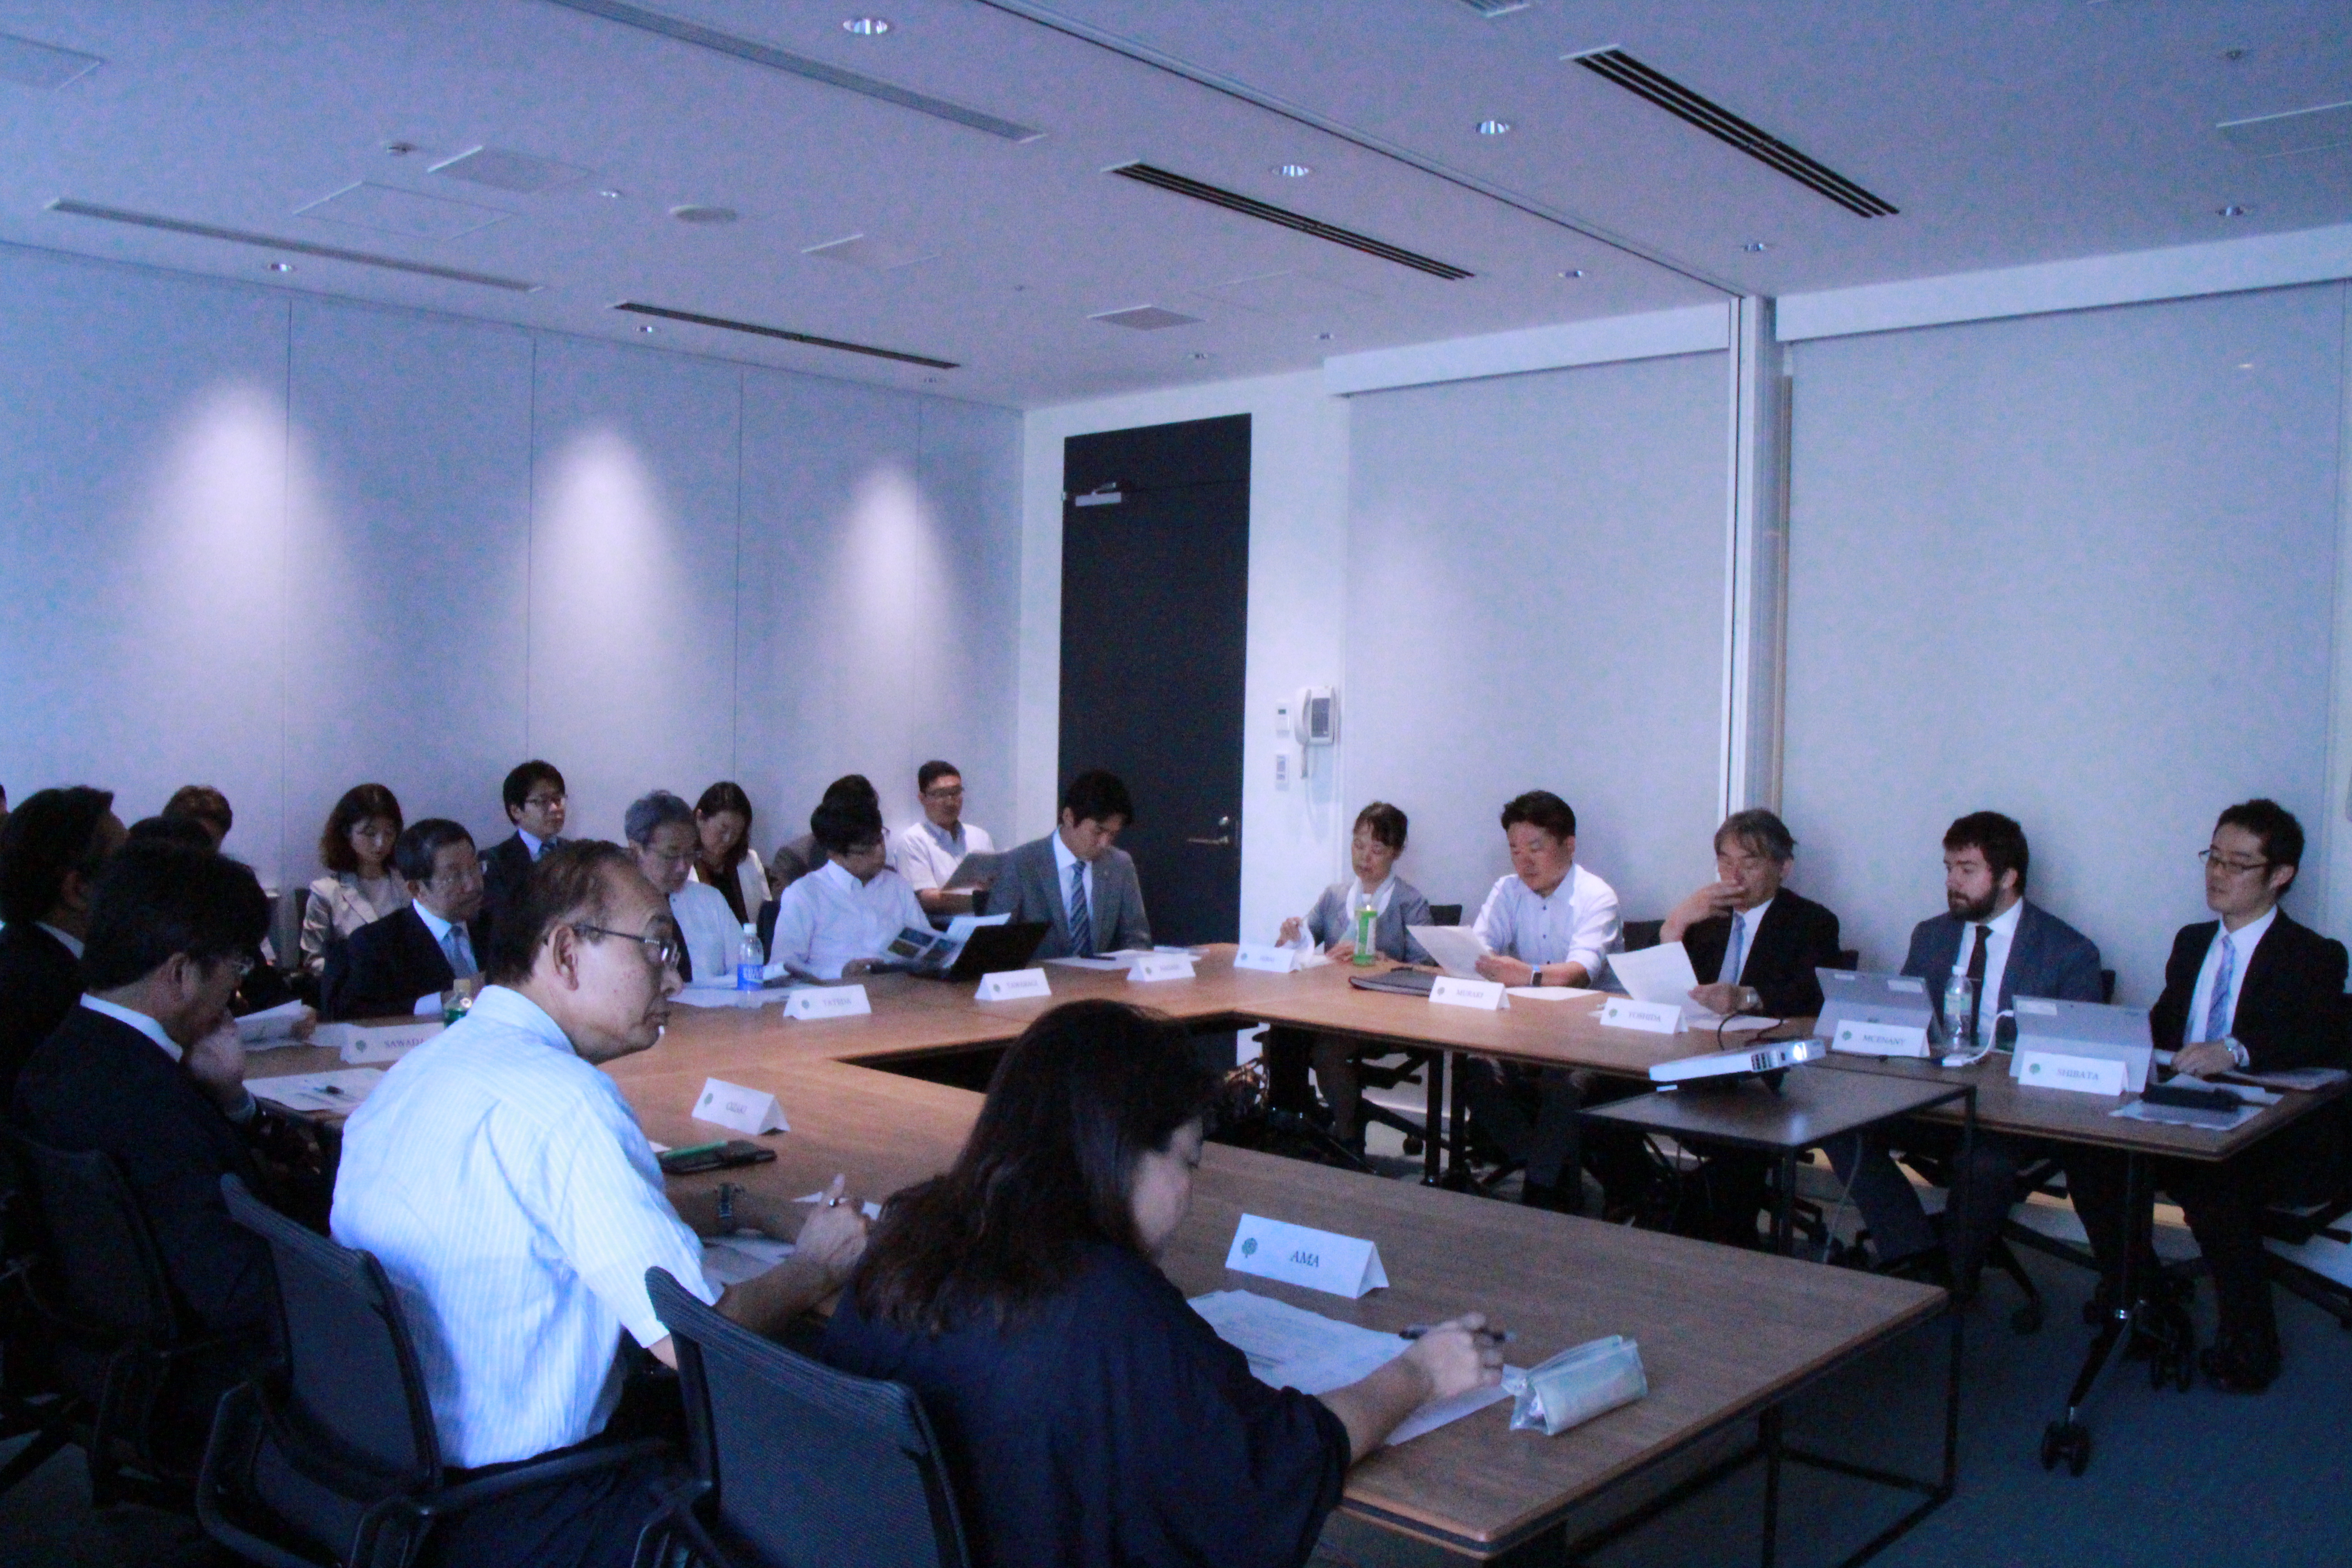 [Event Report] AMR Alliance Japan: Preparatory Meeting for the Advocacy Activities (July 26, 2019)